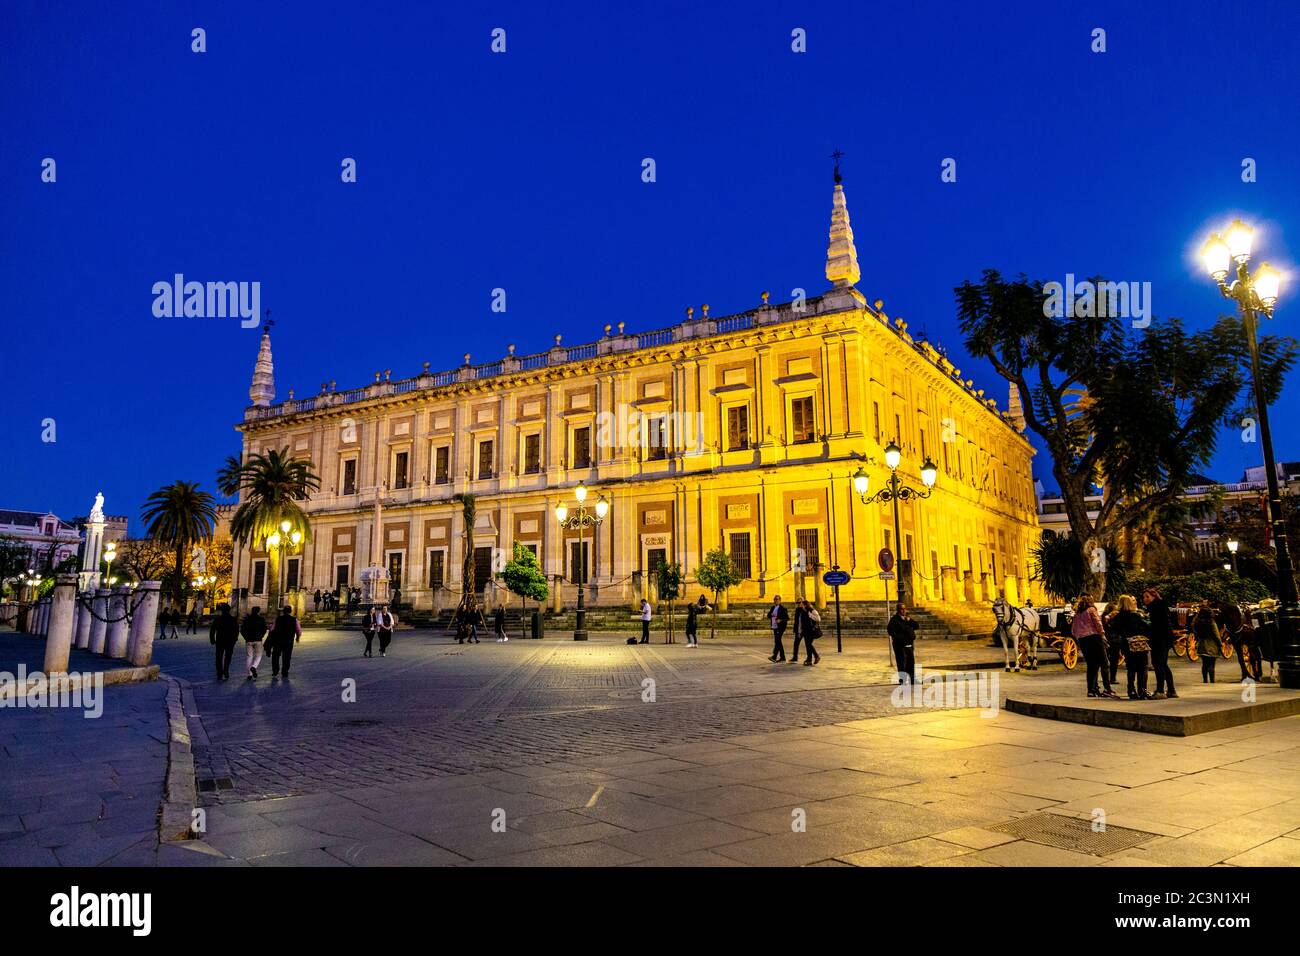 General Archive of the Indies (Archivo de Indias) at night, Seville, Spain Stock Photo